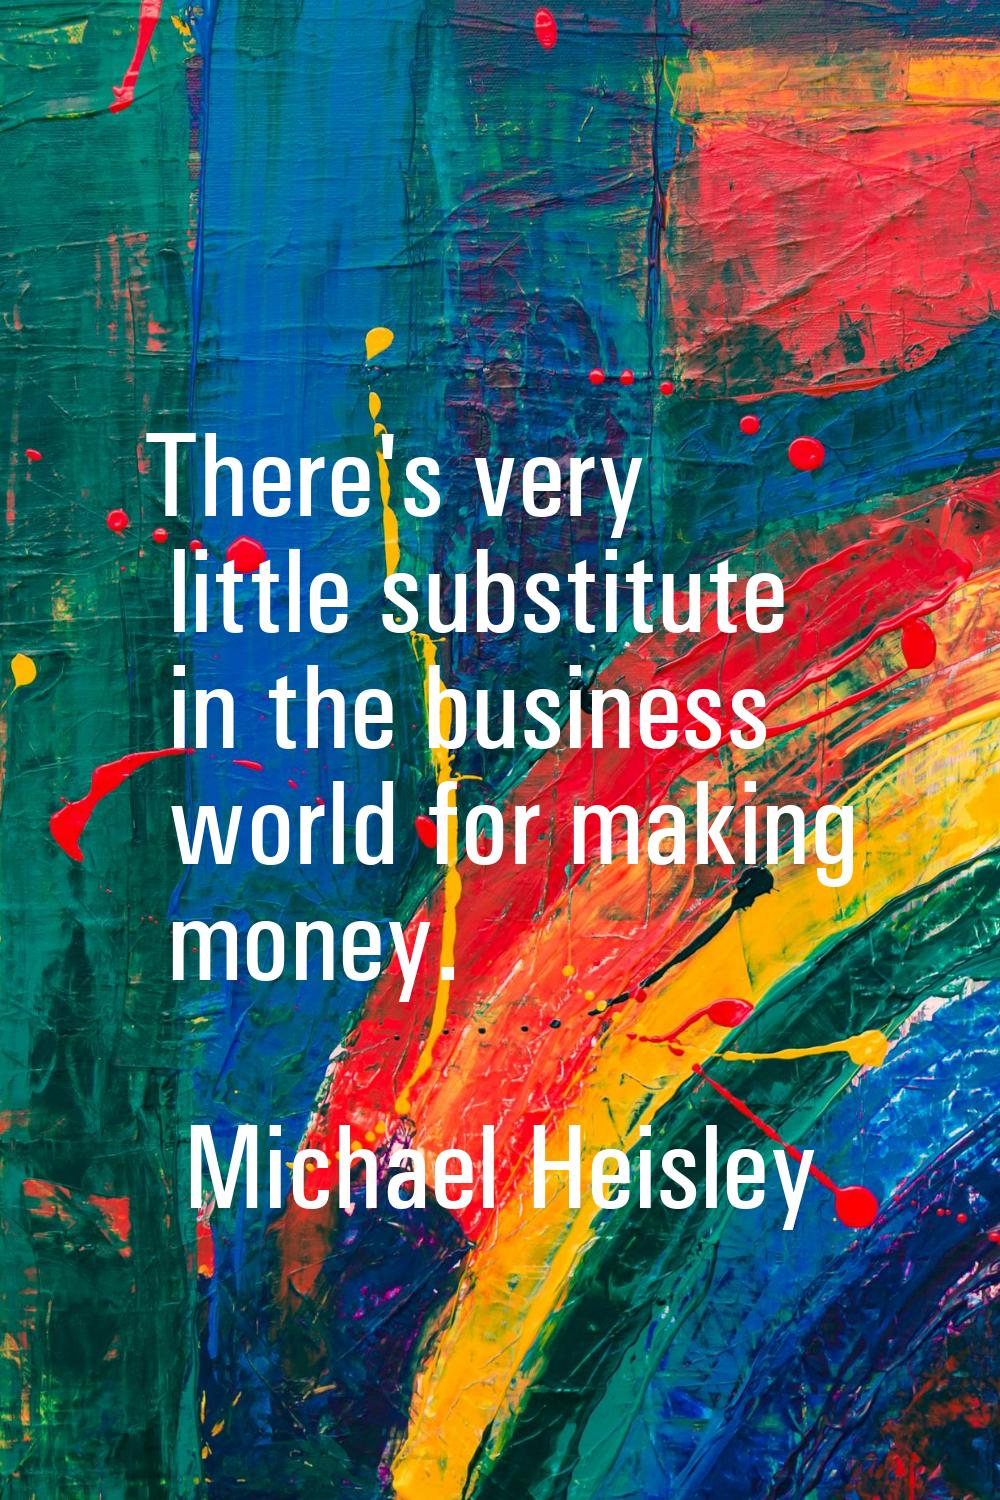 There's very little substitute in the business world for making money.